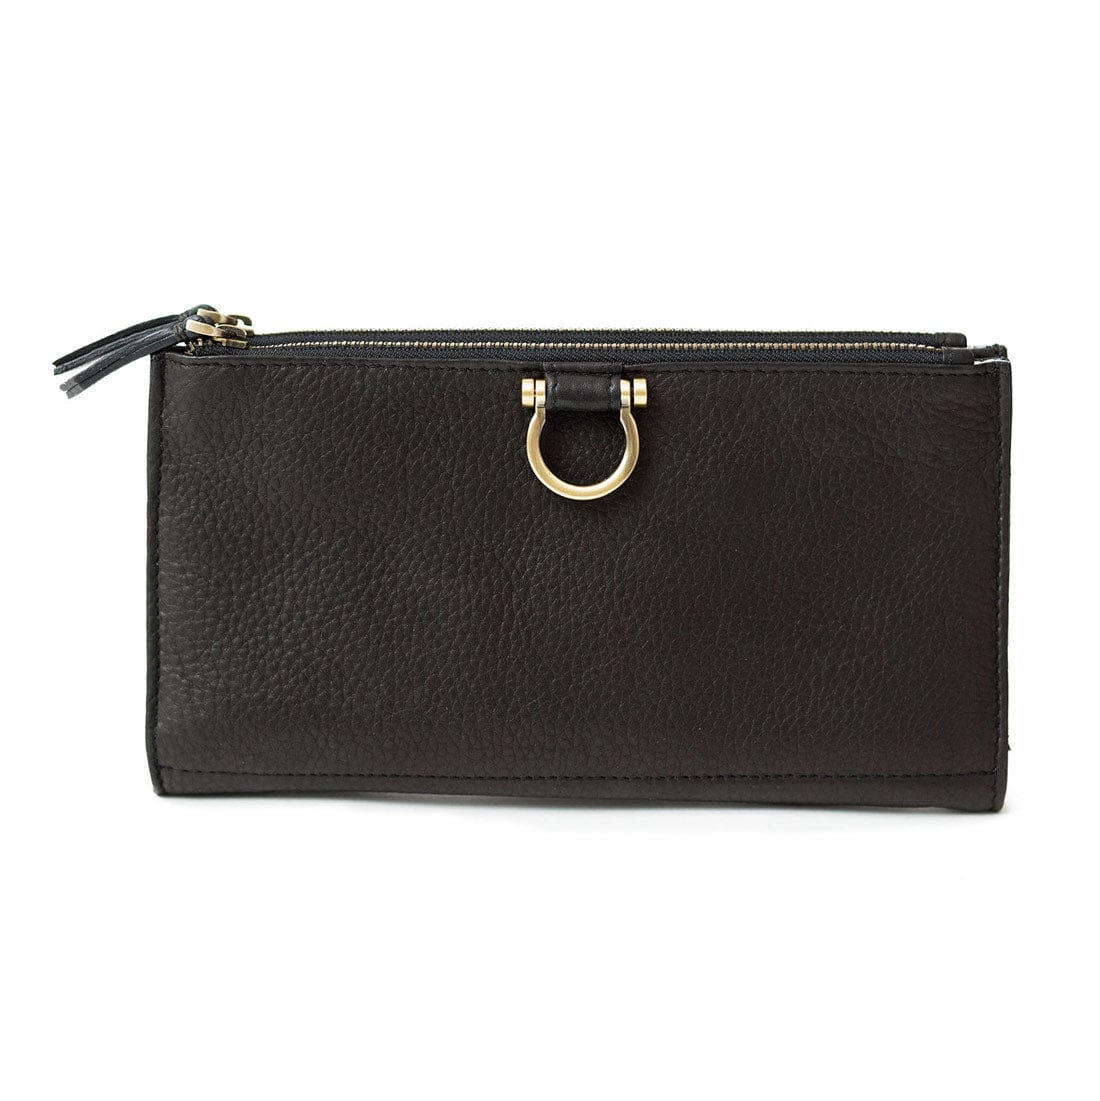 The Parker deluxe wristlet wallet in black raw leather is minimalist and features Omega hardware.